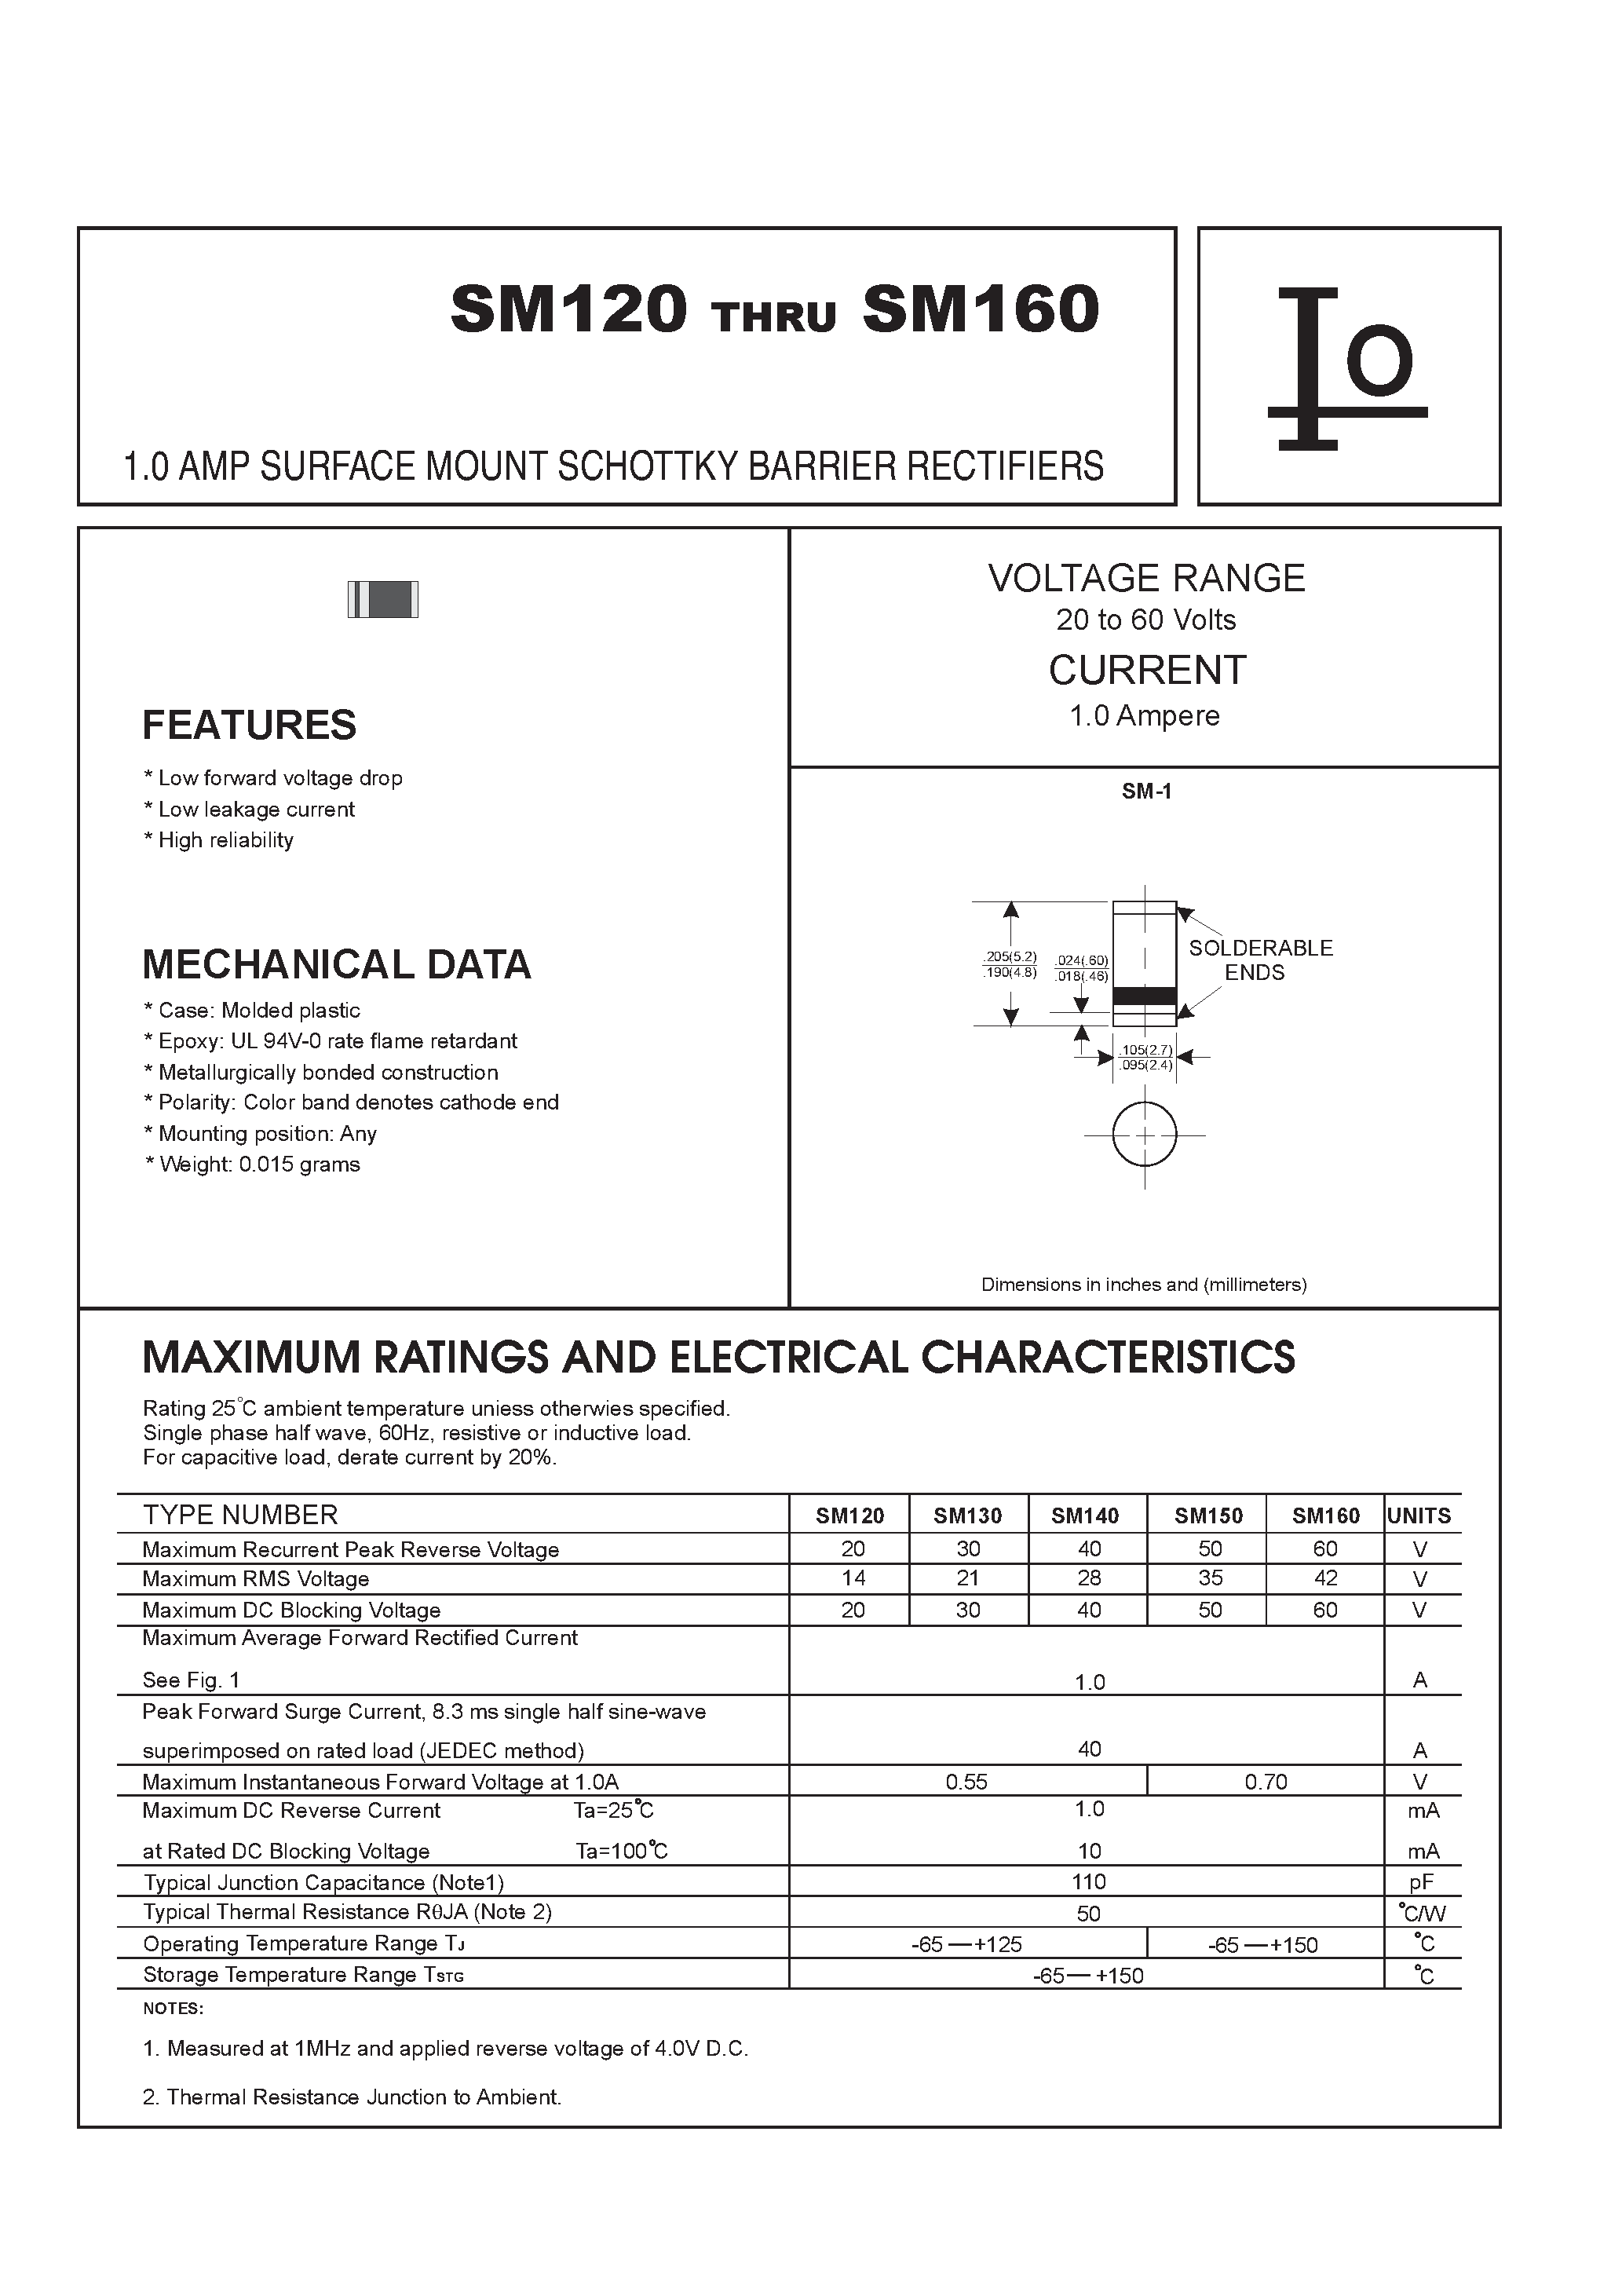 Datasheet SM130 - 1.0 AMP SURFACE MOUNT SCHOTTKY BARRIER RECTIFIERS page 1